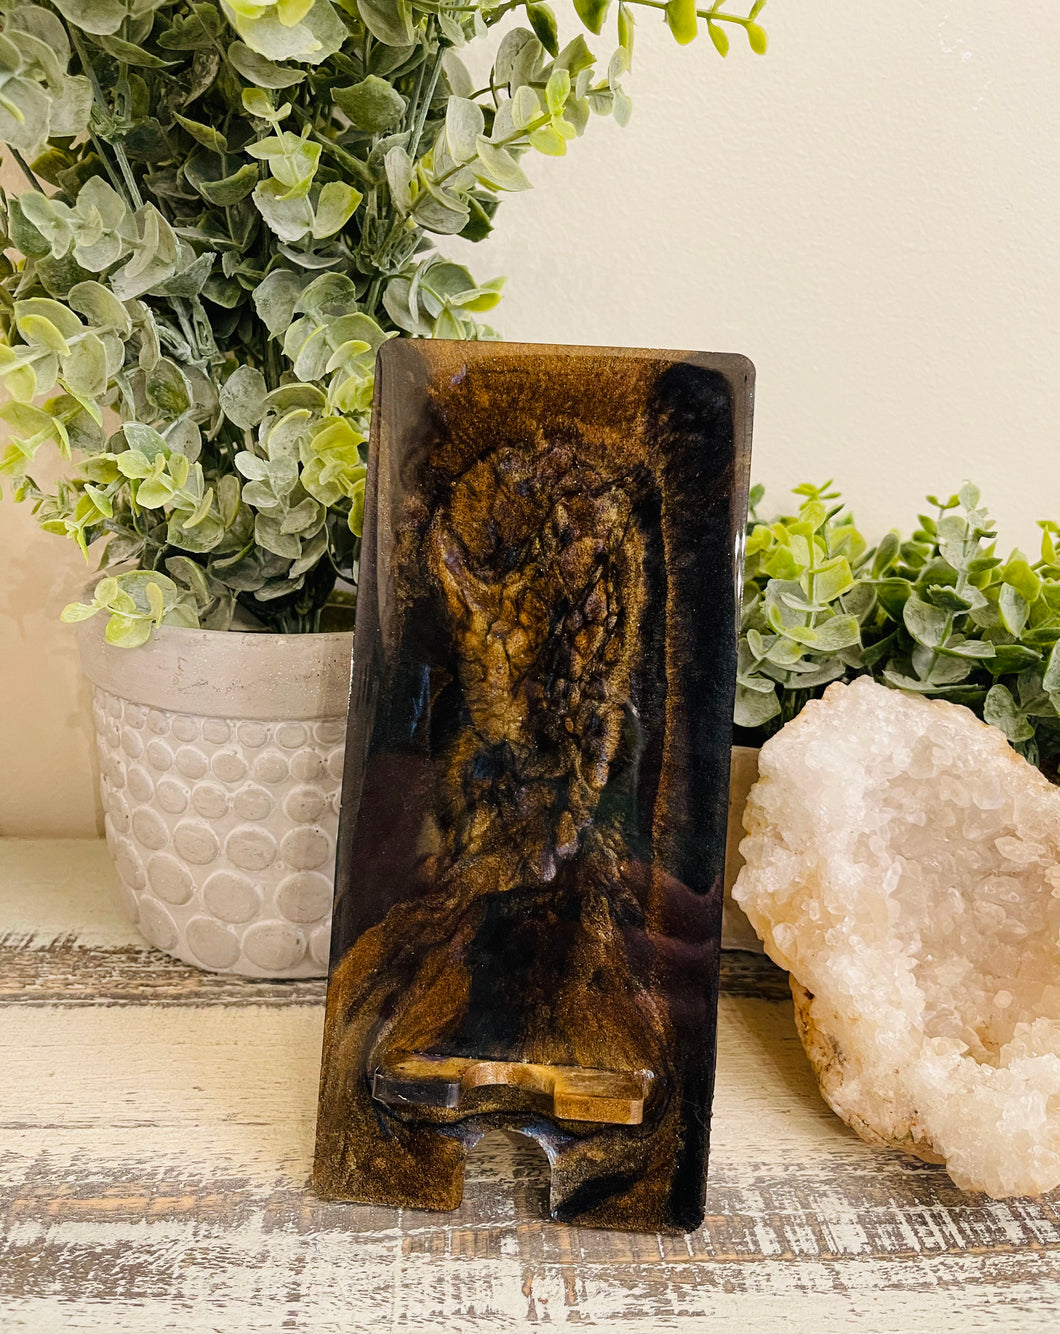 Phone Stand 15 - Black, Gold and Bronze with Blue Color Shift pigment